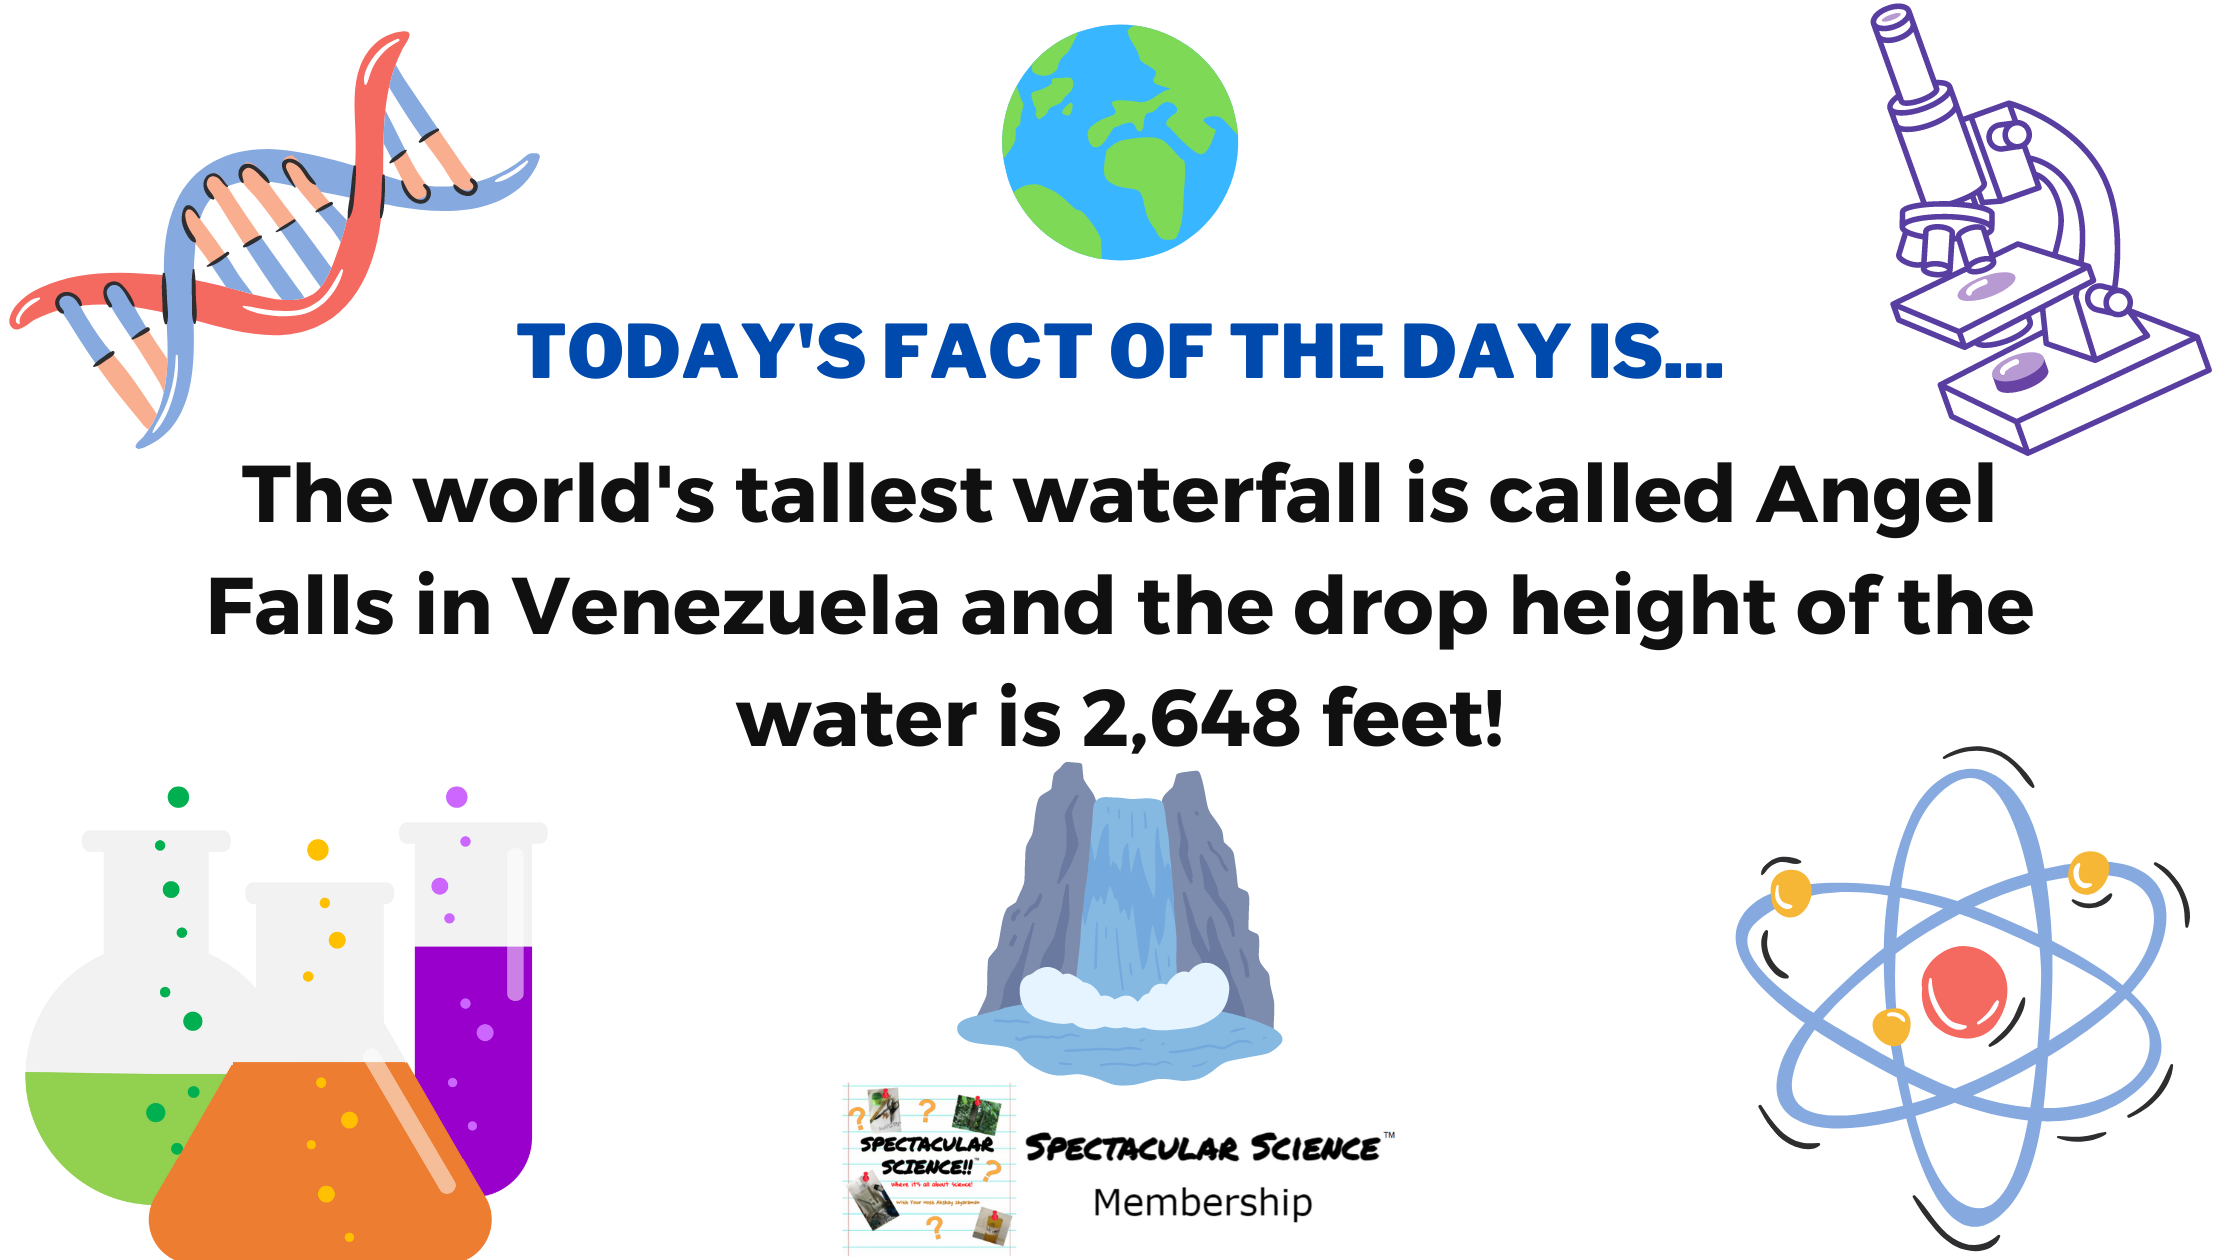 Fact of the Day Image November 11th